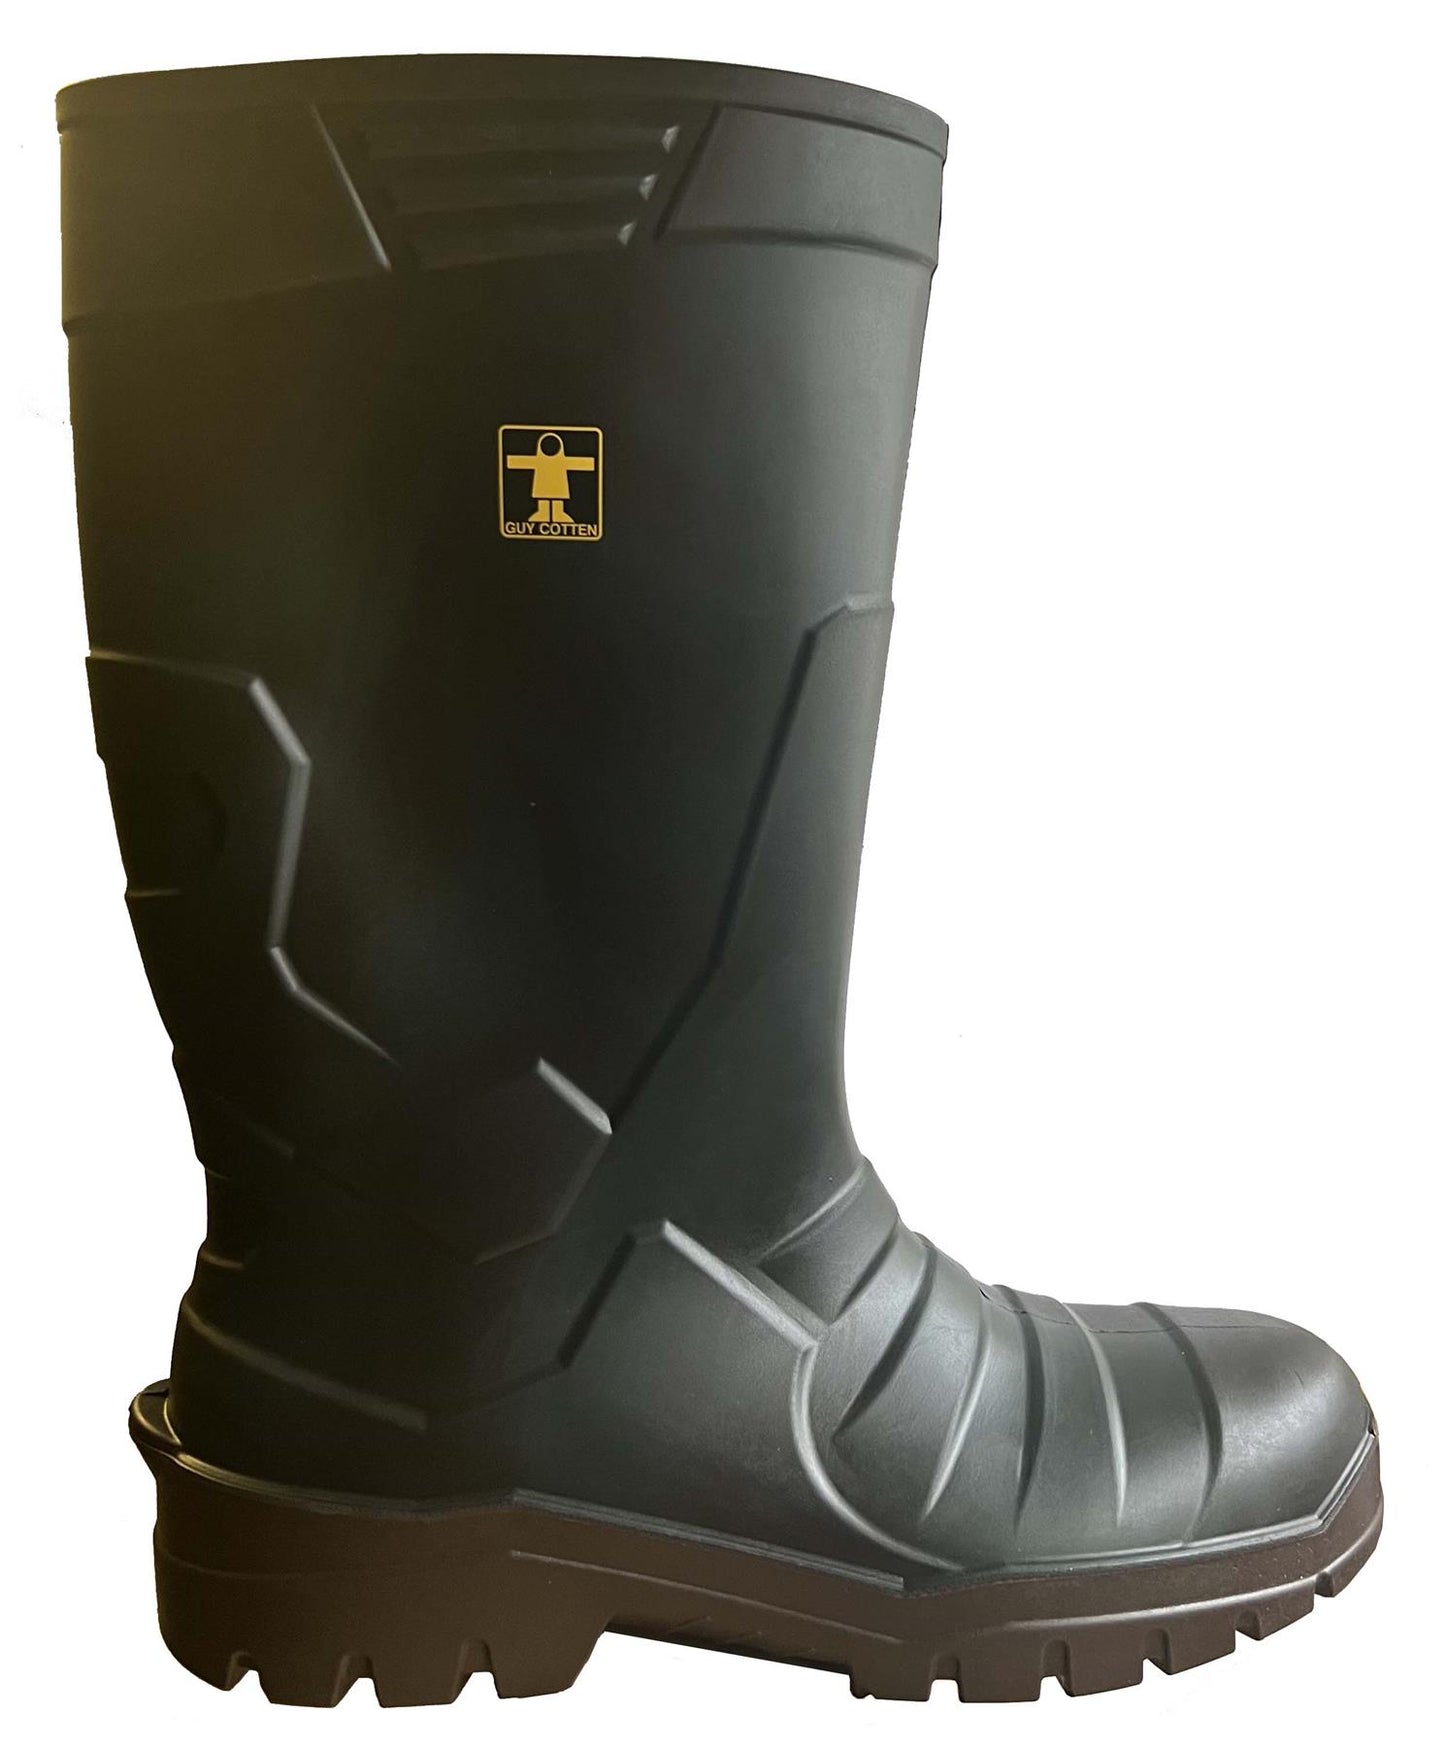 Bottes Guy Cotten GC UltraLite - Camouflage